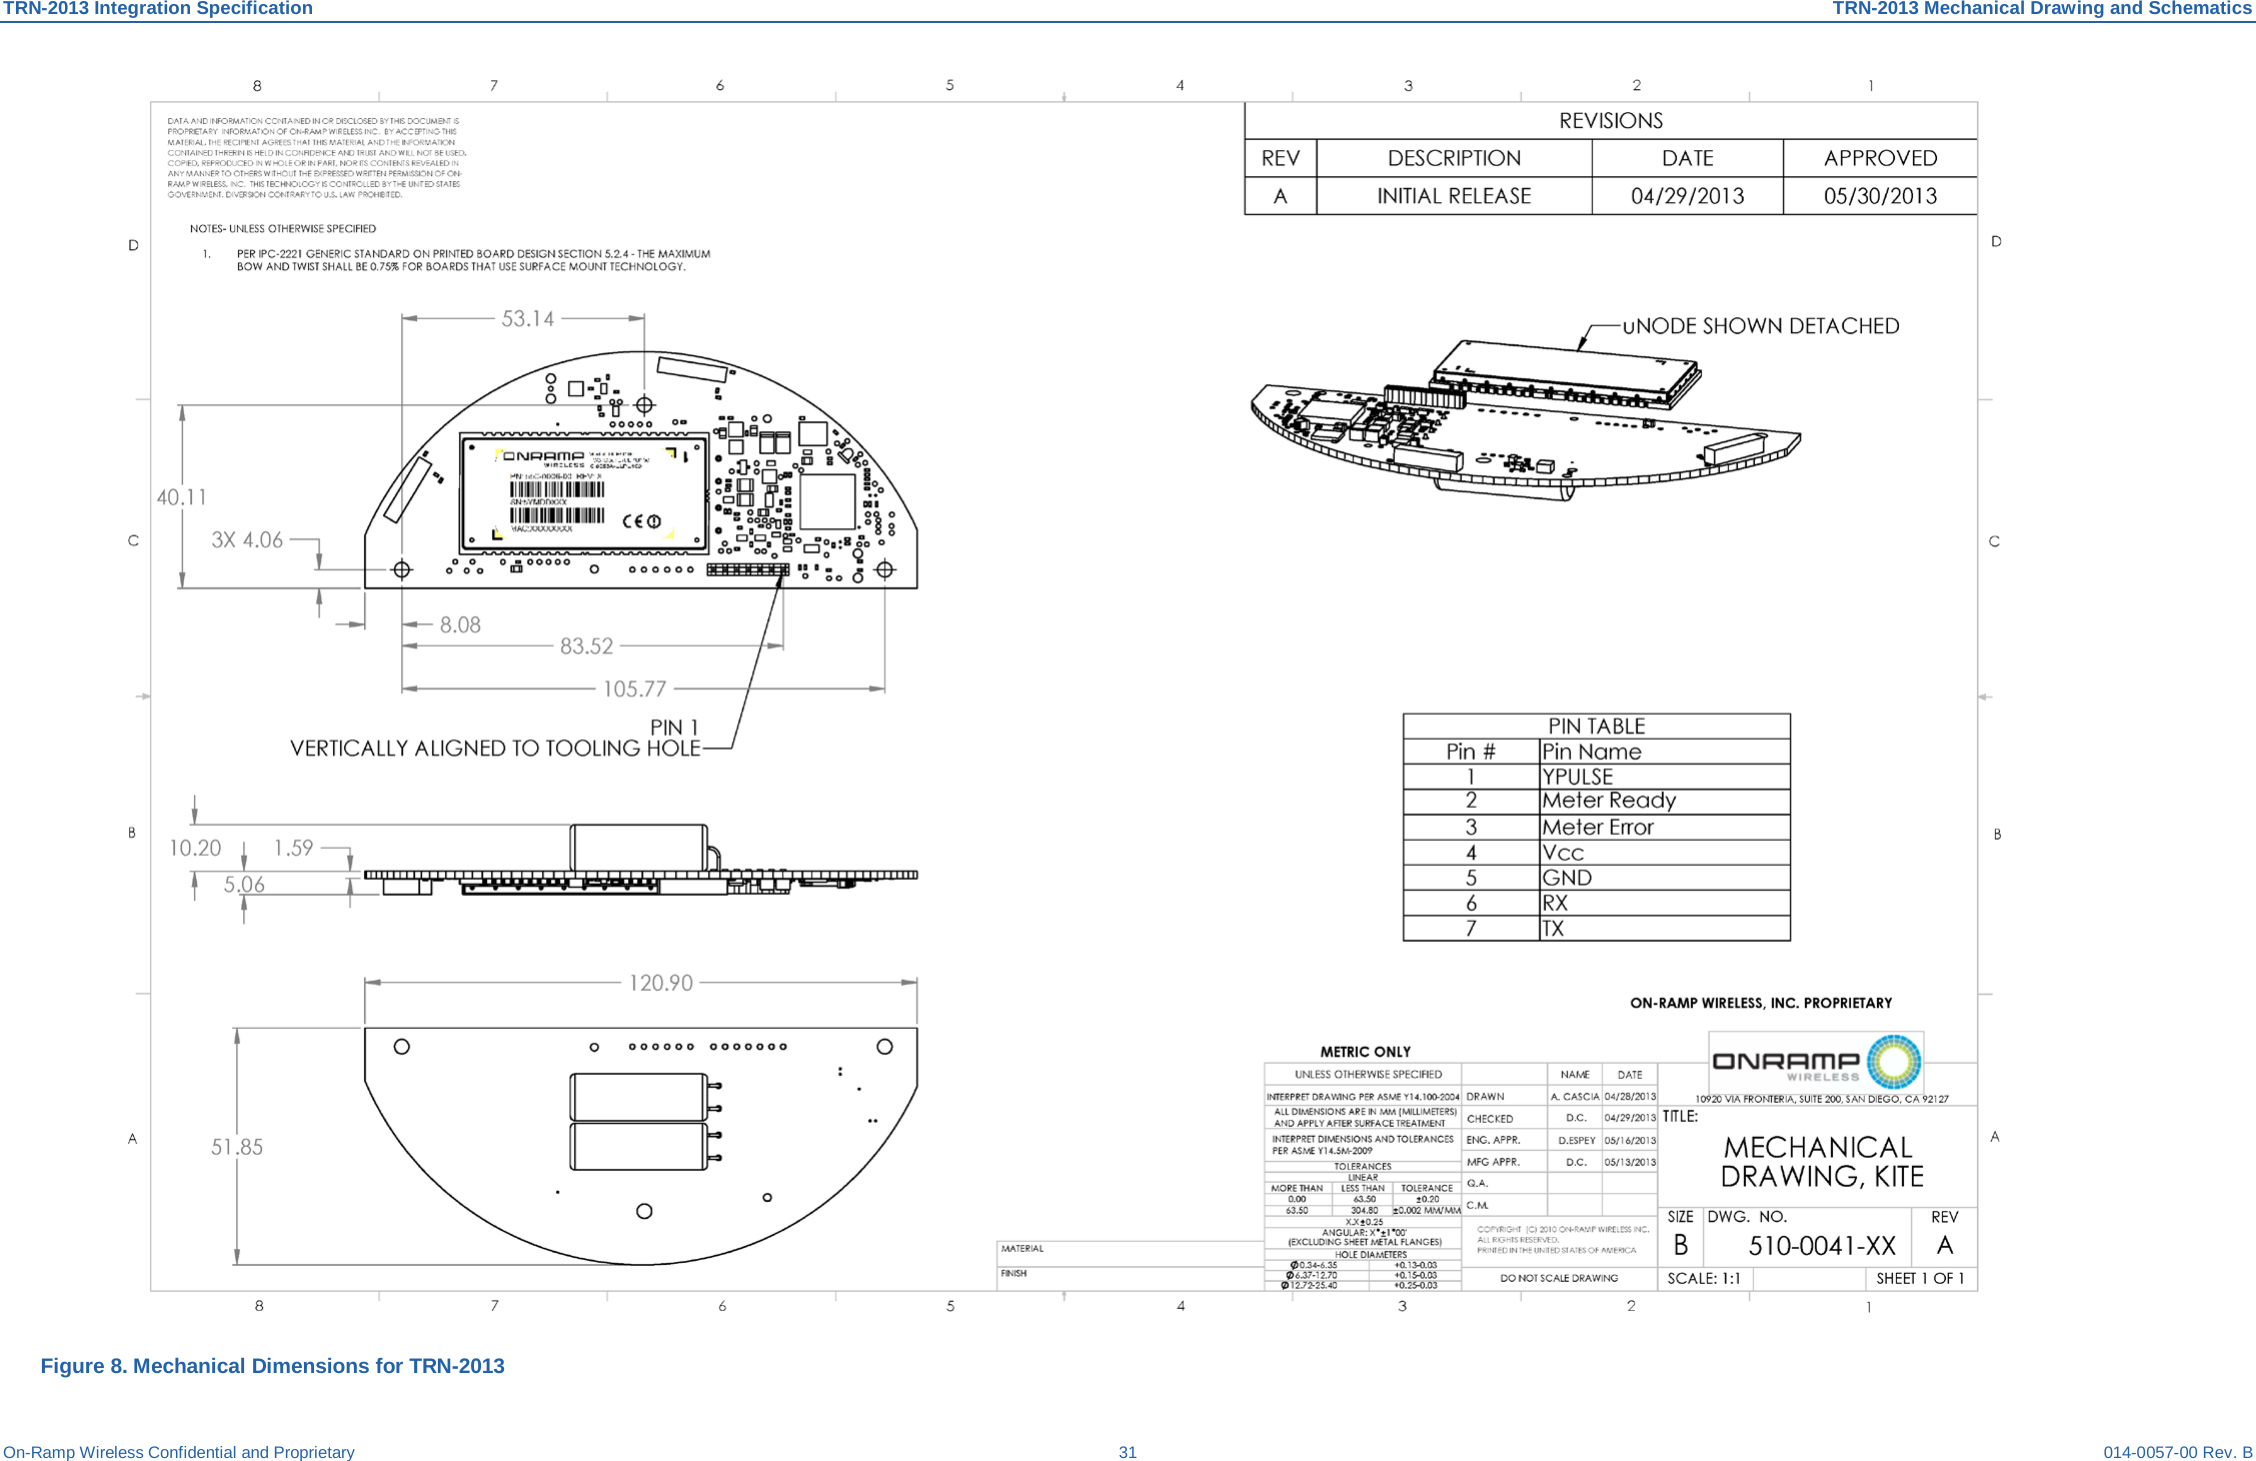 TRN-2013 Integration Specification TRN-2013 Mechanical Drawing and Schematics On-Ramp Wireless Confidential and Proprietary 31 014-0057-00 Rev. B  Figure 8. Mechanical Dimensions for TRN-2013 